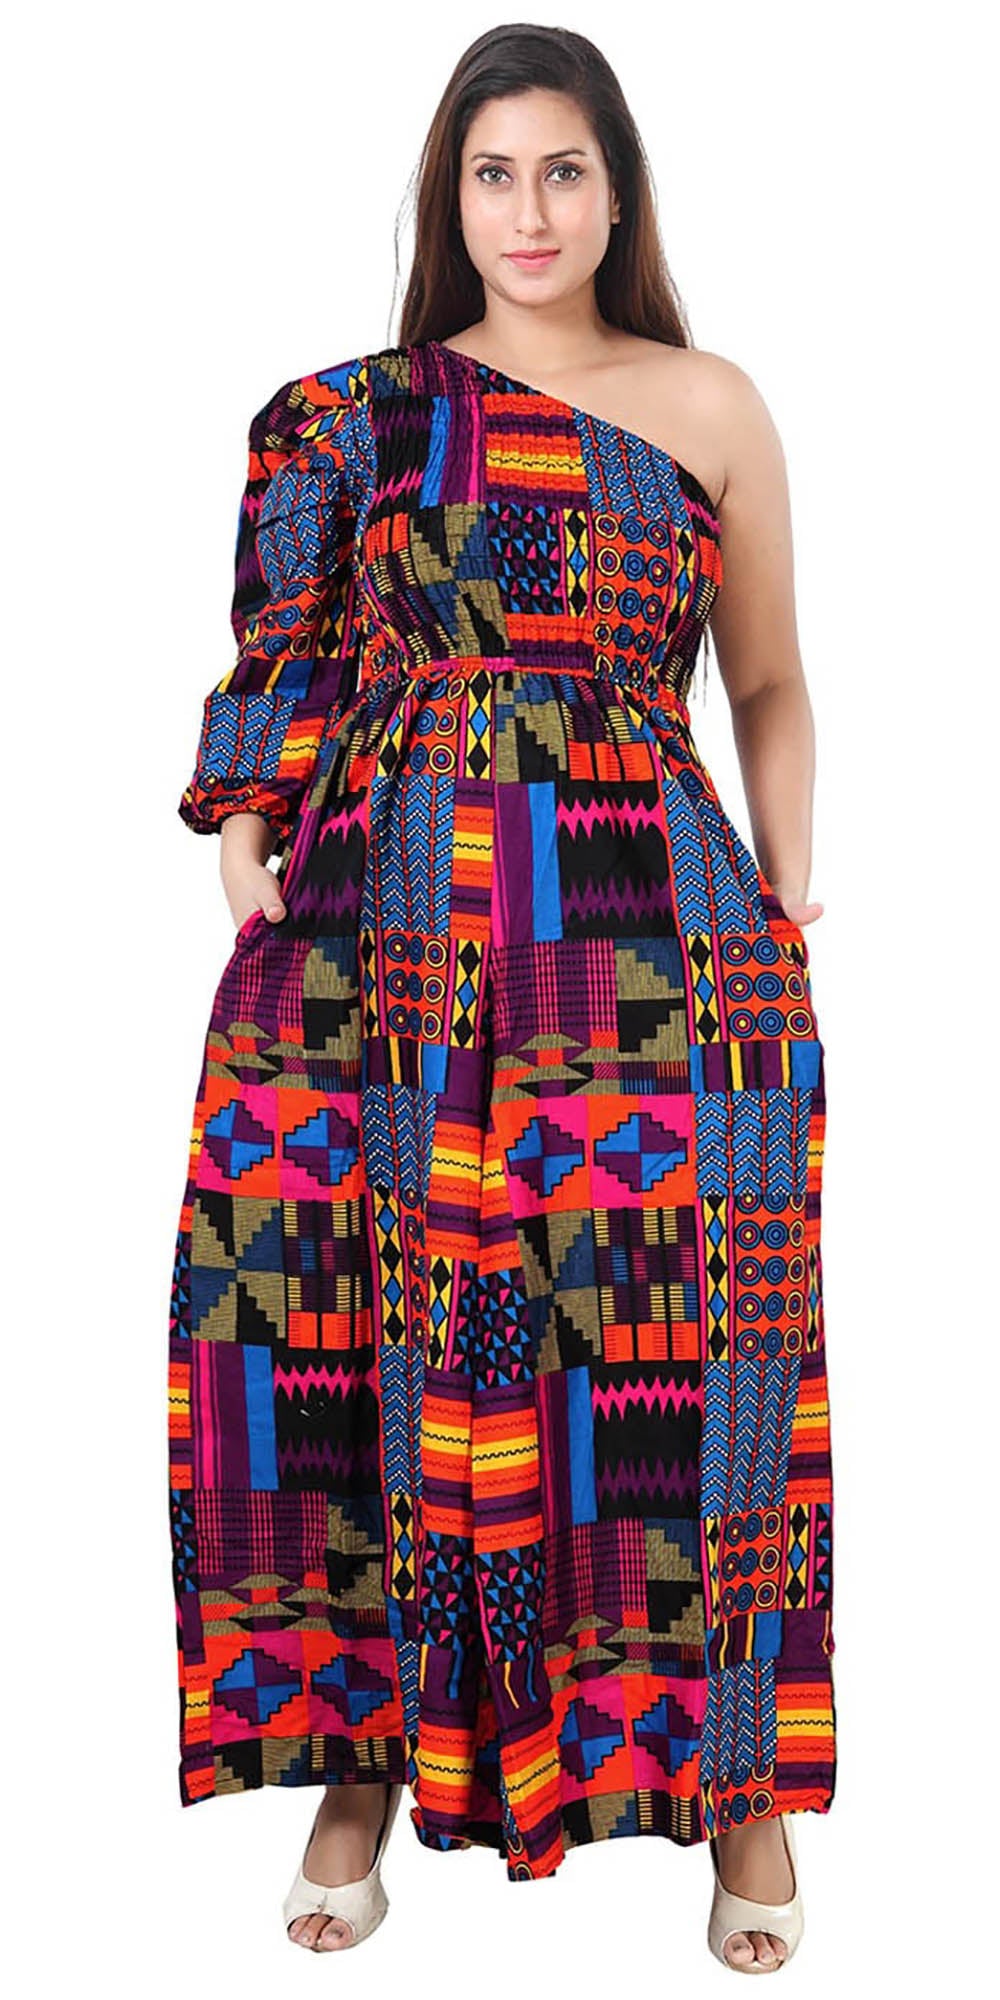 KaraChic 7616 - 550 -Womens One Shoulder Style Smocked Jumpsuit In African Inspired Print